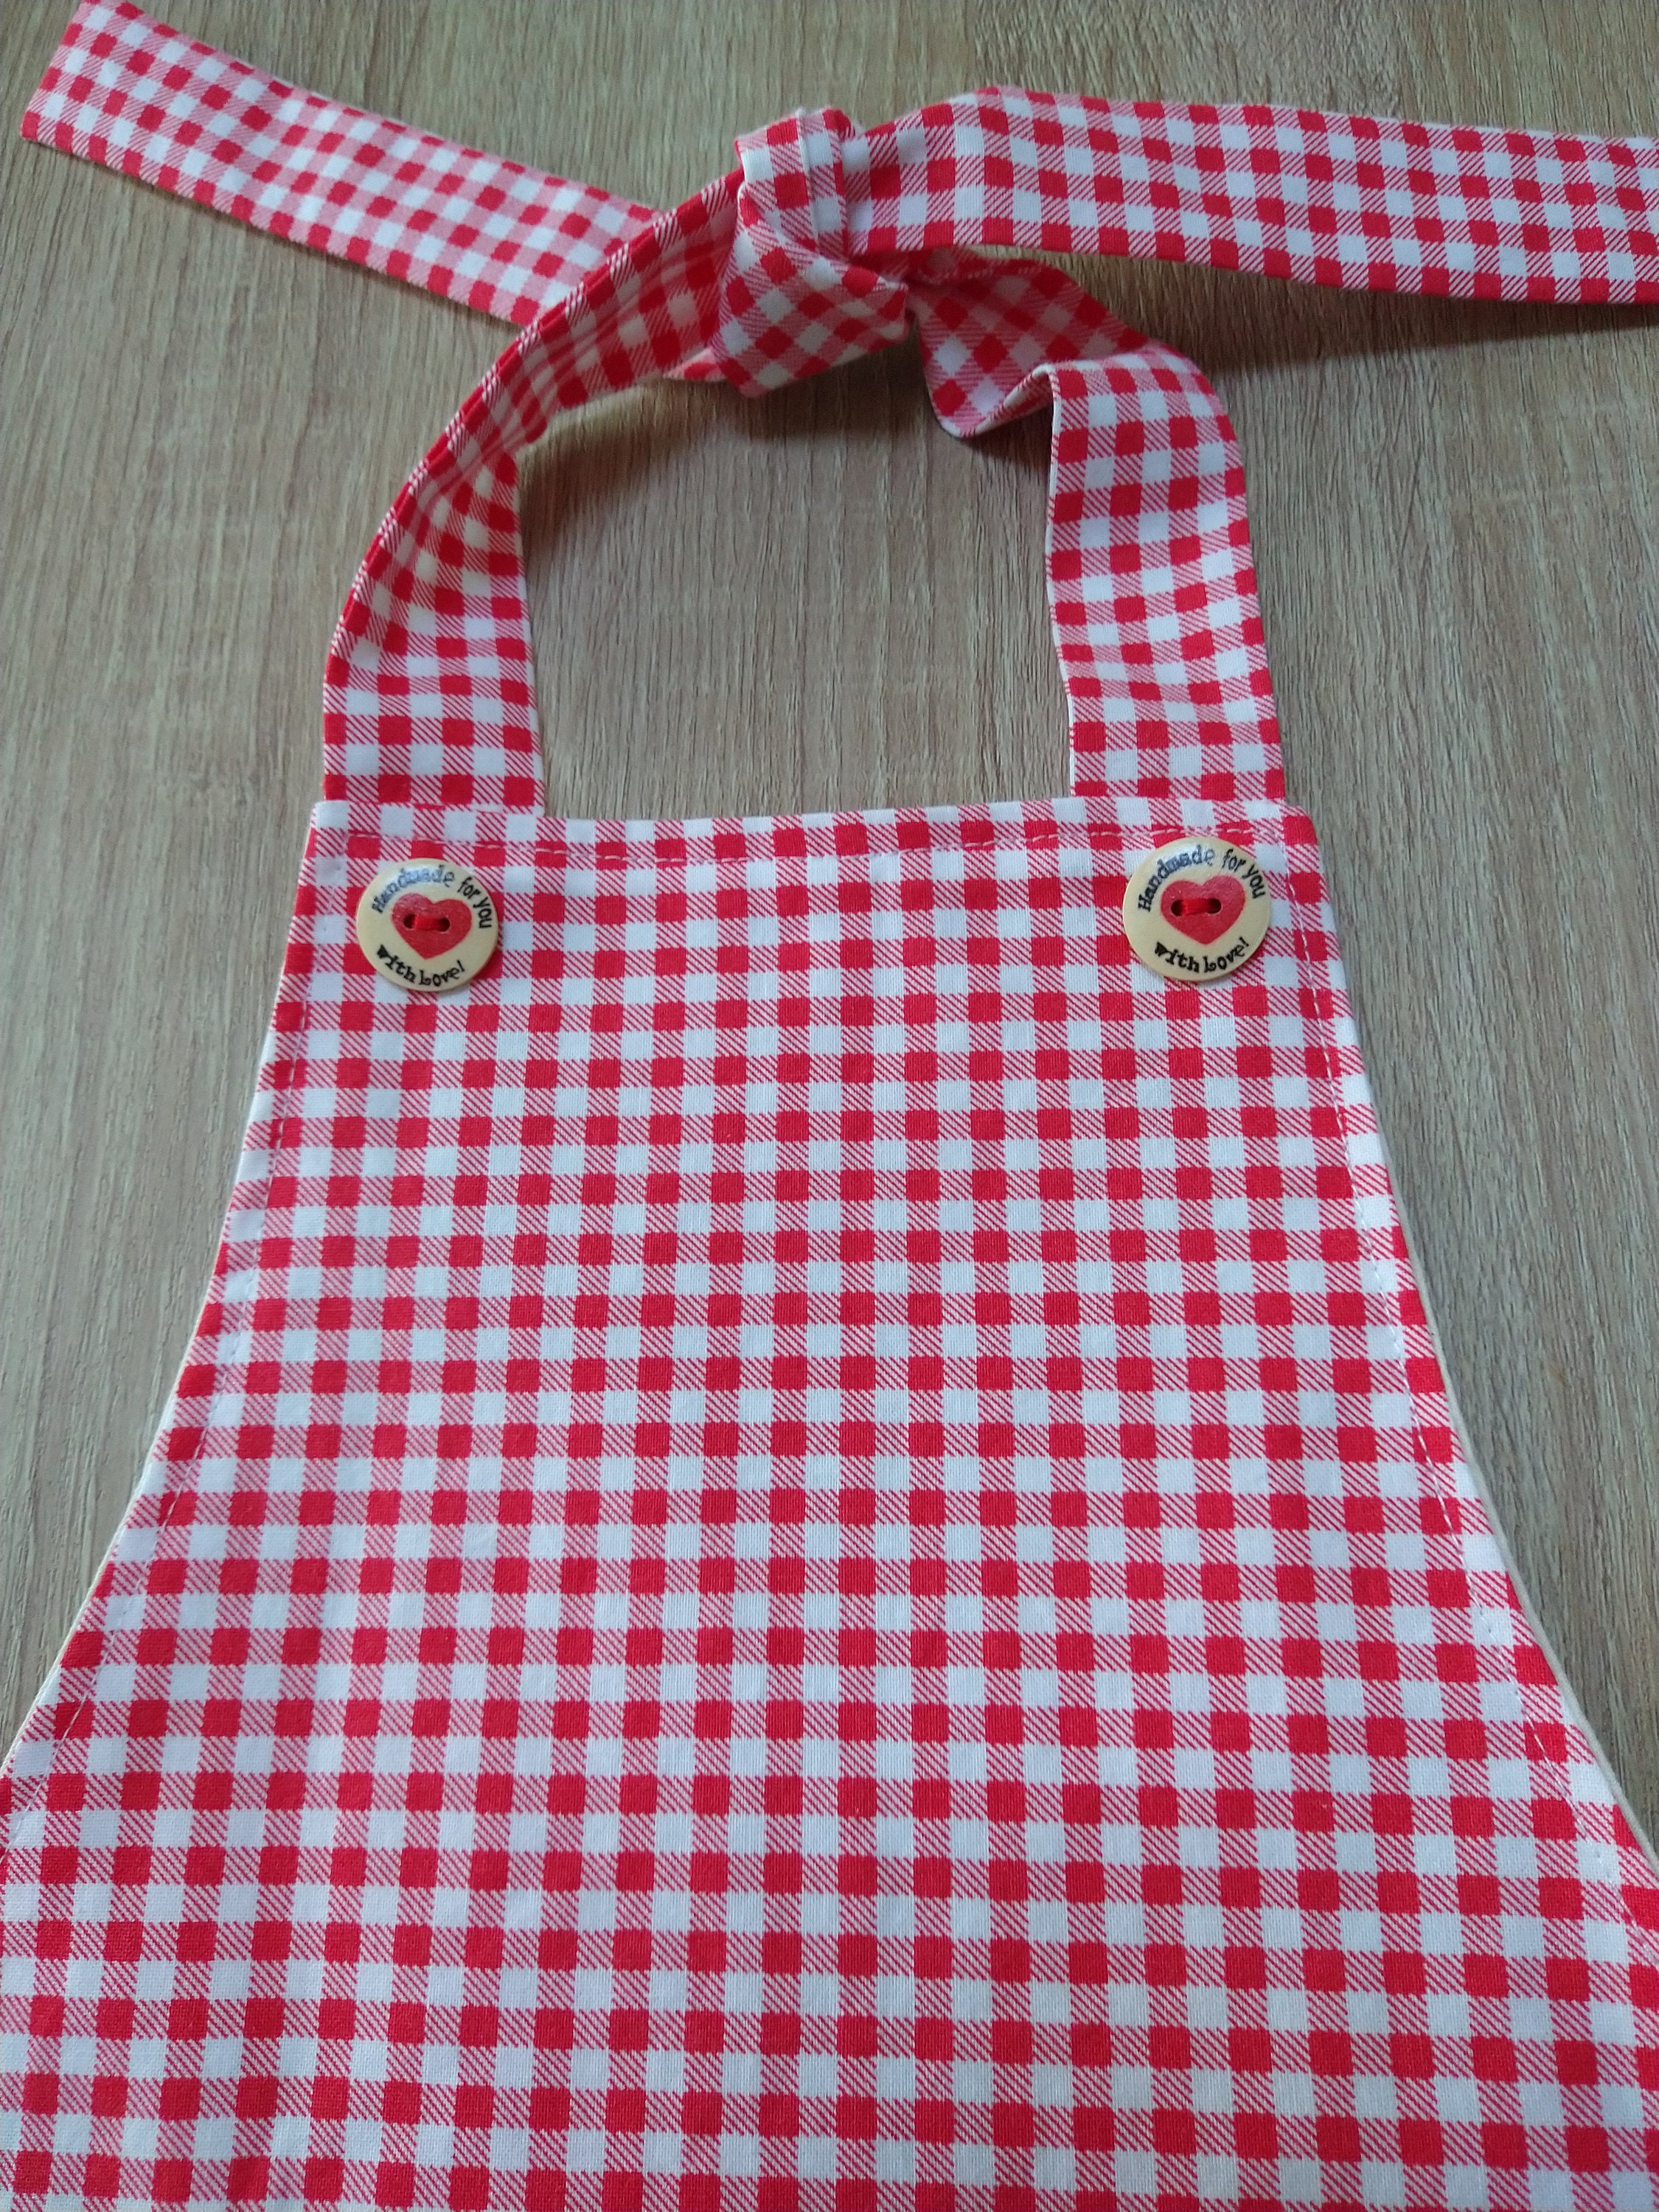 Nylon Childrens Art Apron, Red Apron for kids, Painting Apron for child, kids  play apron, Girls Apron red color, child size apron